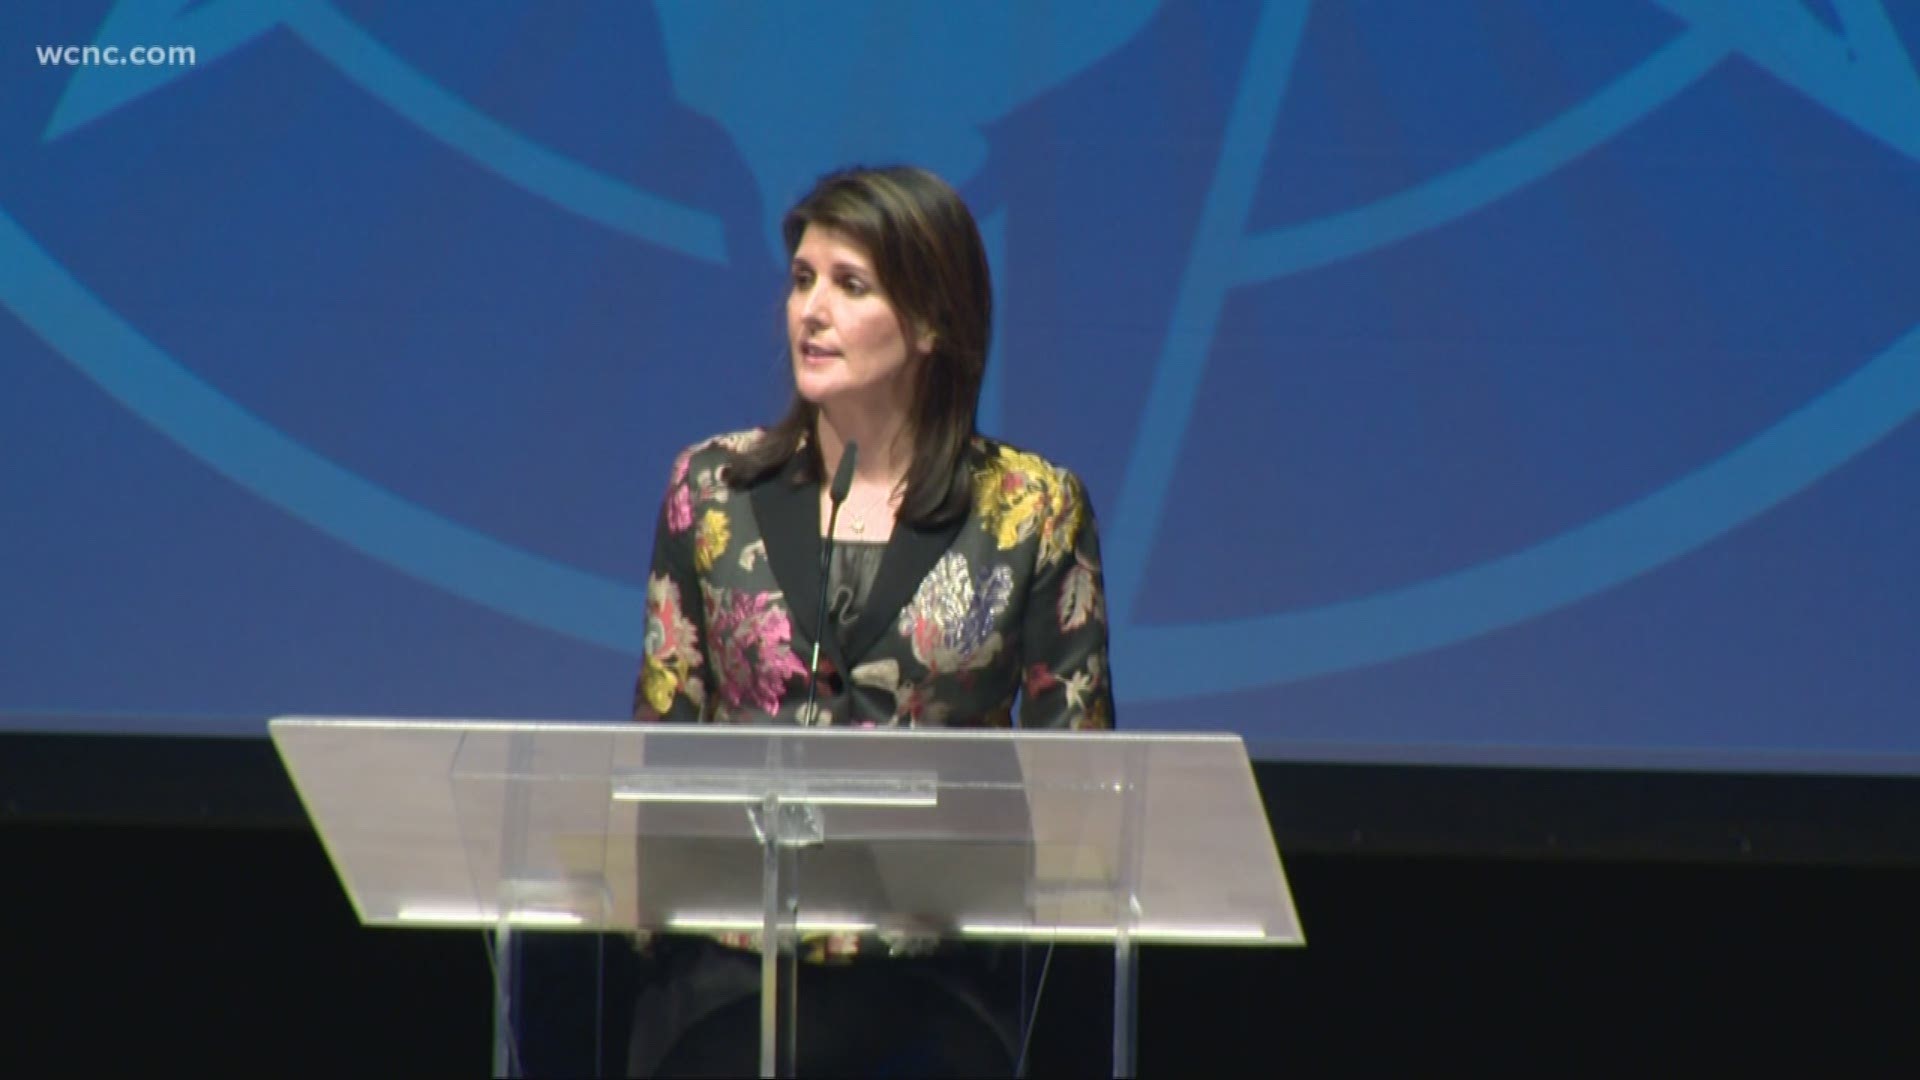 During her acceptance, Nikki Haley touched on how her time as governor prepared her for the U.N.